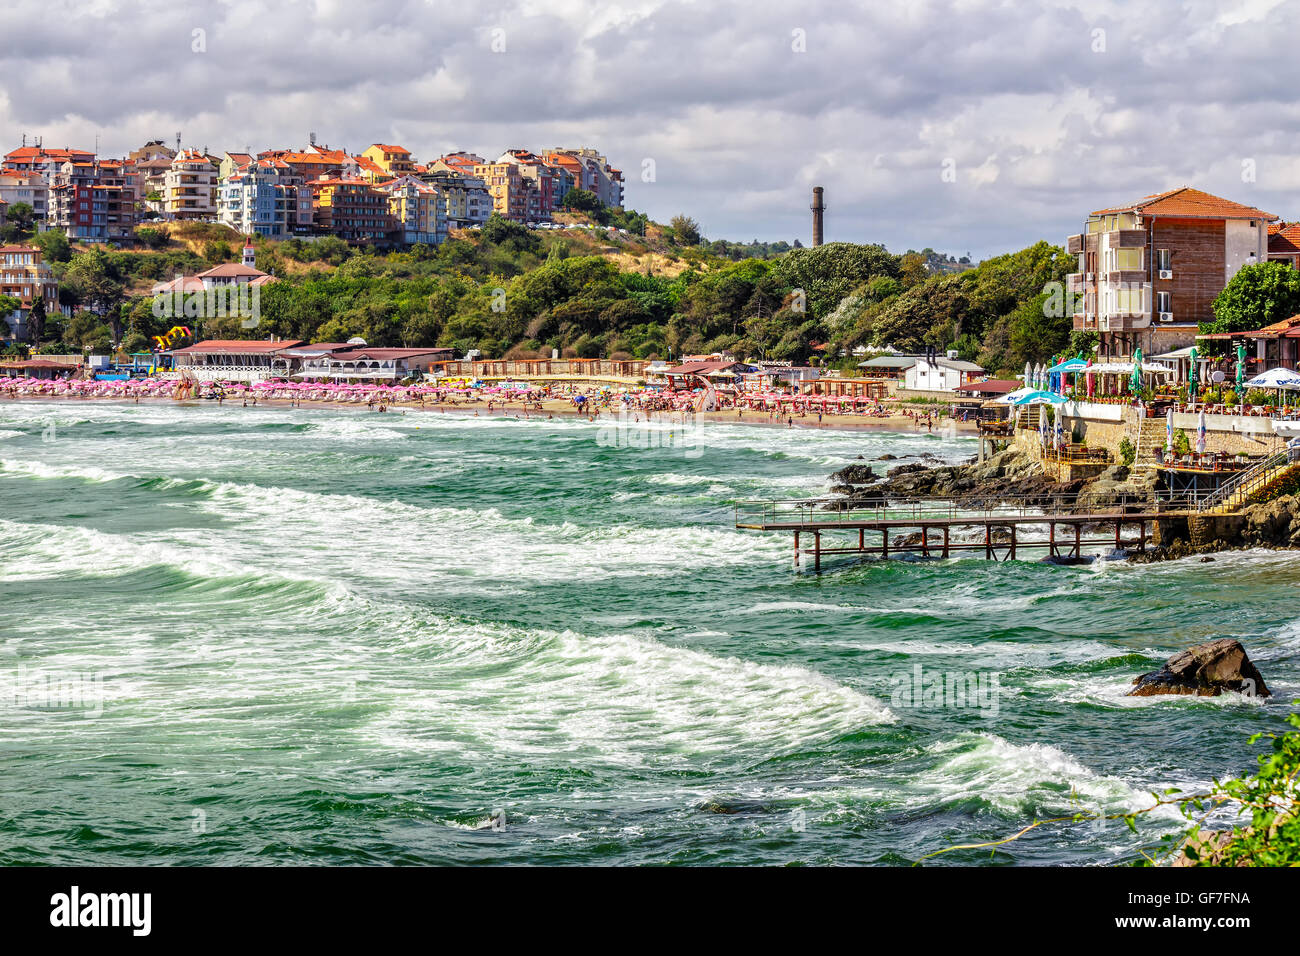 SOZOPOL - AUGUST 9: Old City  beach on August 9, 2015 in Sozopol, Bulgaria. Waves running  on to the beach of ancient Bulgarian Stock Photo